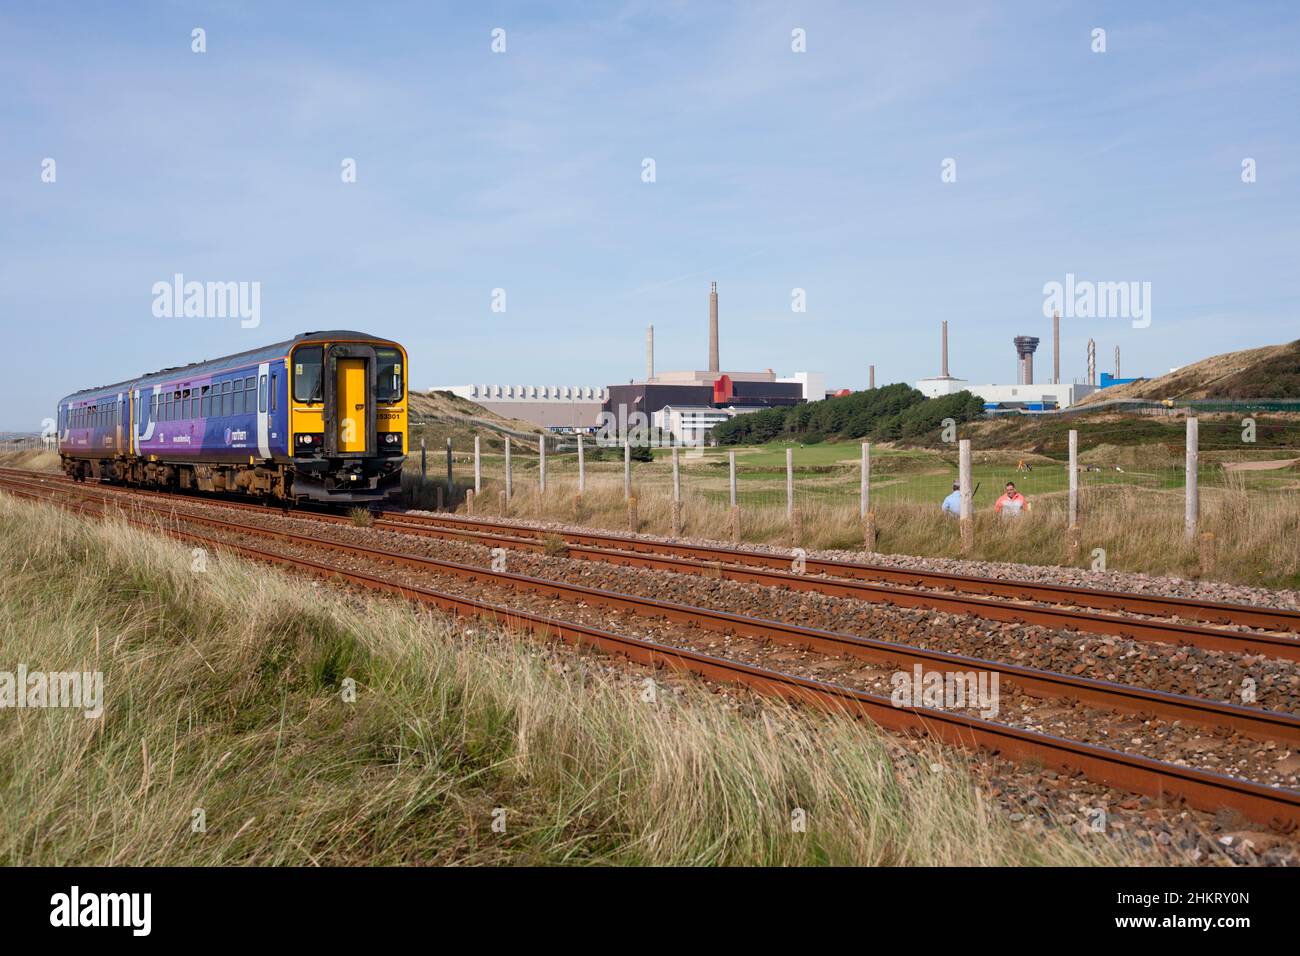 2 Northern rail class 153 sprinter trains 153301 + 153351 passing Sellafield nuclear reprocessing  plant on the Cumbrian coast railway line Stock Photo